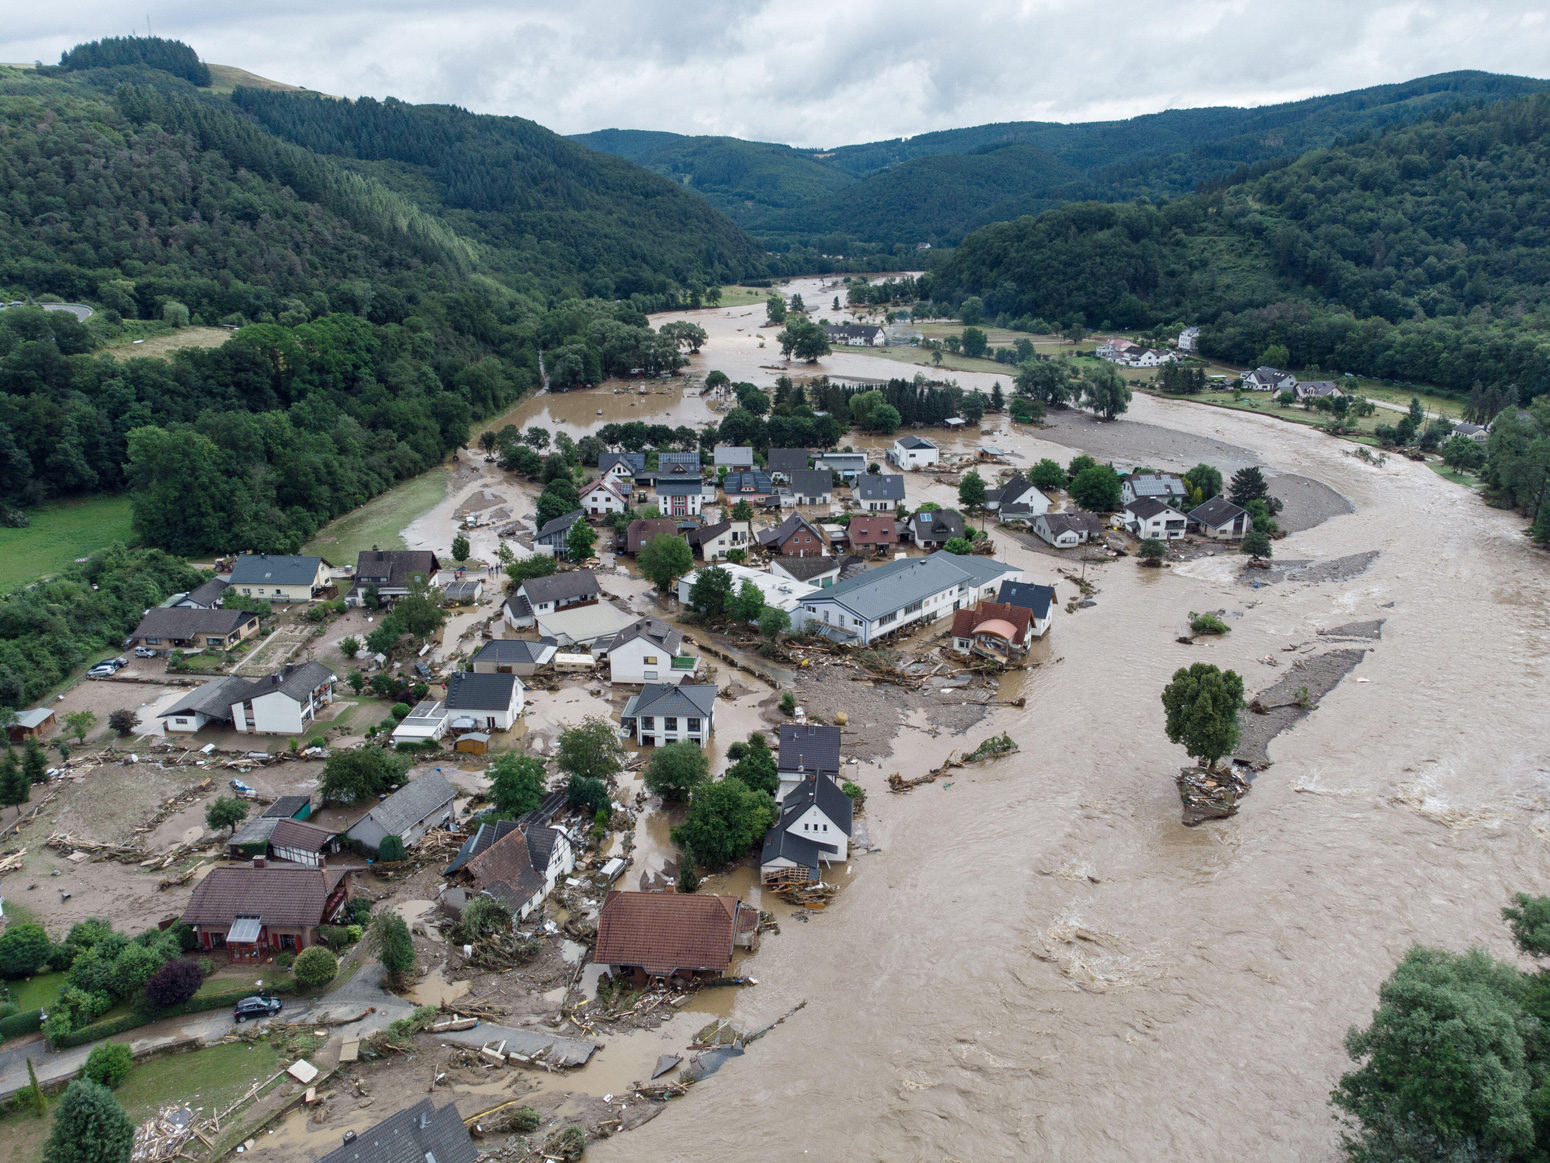 The village of Insol in Rhineland-Palatinate is largely flooded after massive rainfall